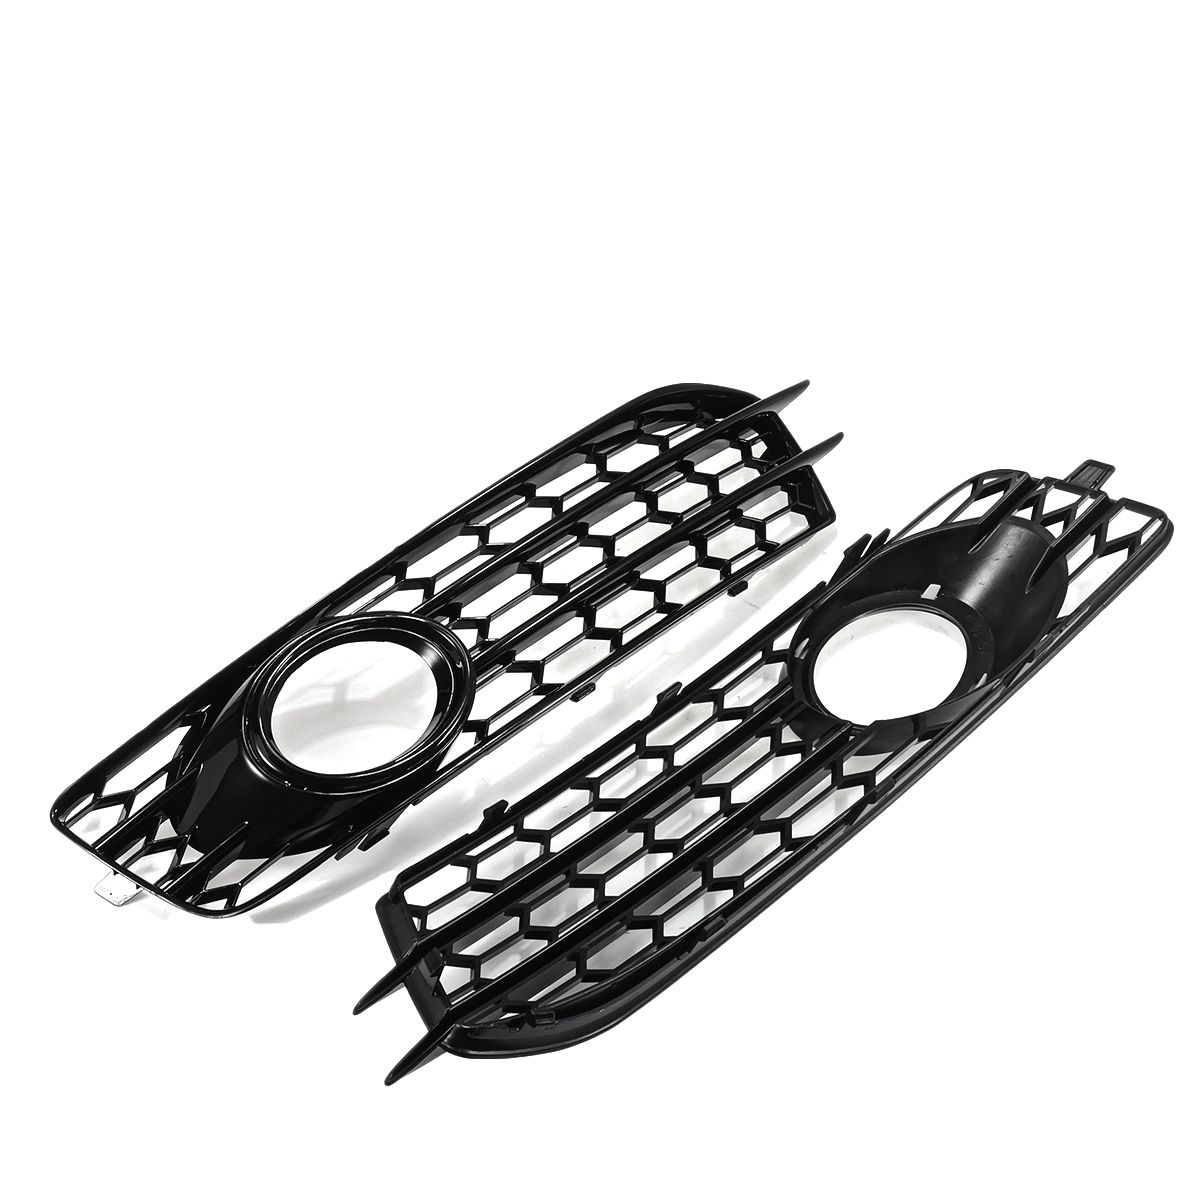 Front-Fog-Light-Lamp-Grille-Grill-Cover-Honeycomb-Hex-Glossy-Black-For-Audi-A3-8P-S-Line-2009-2012-1750298